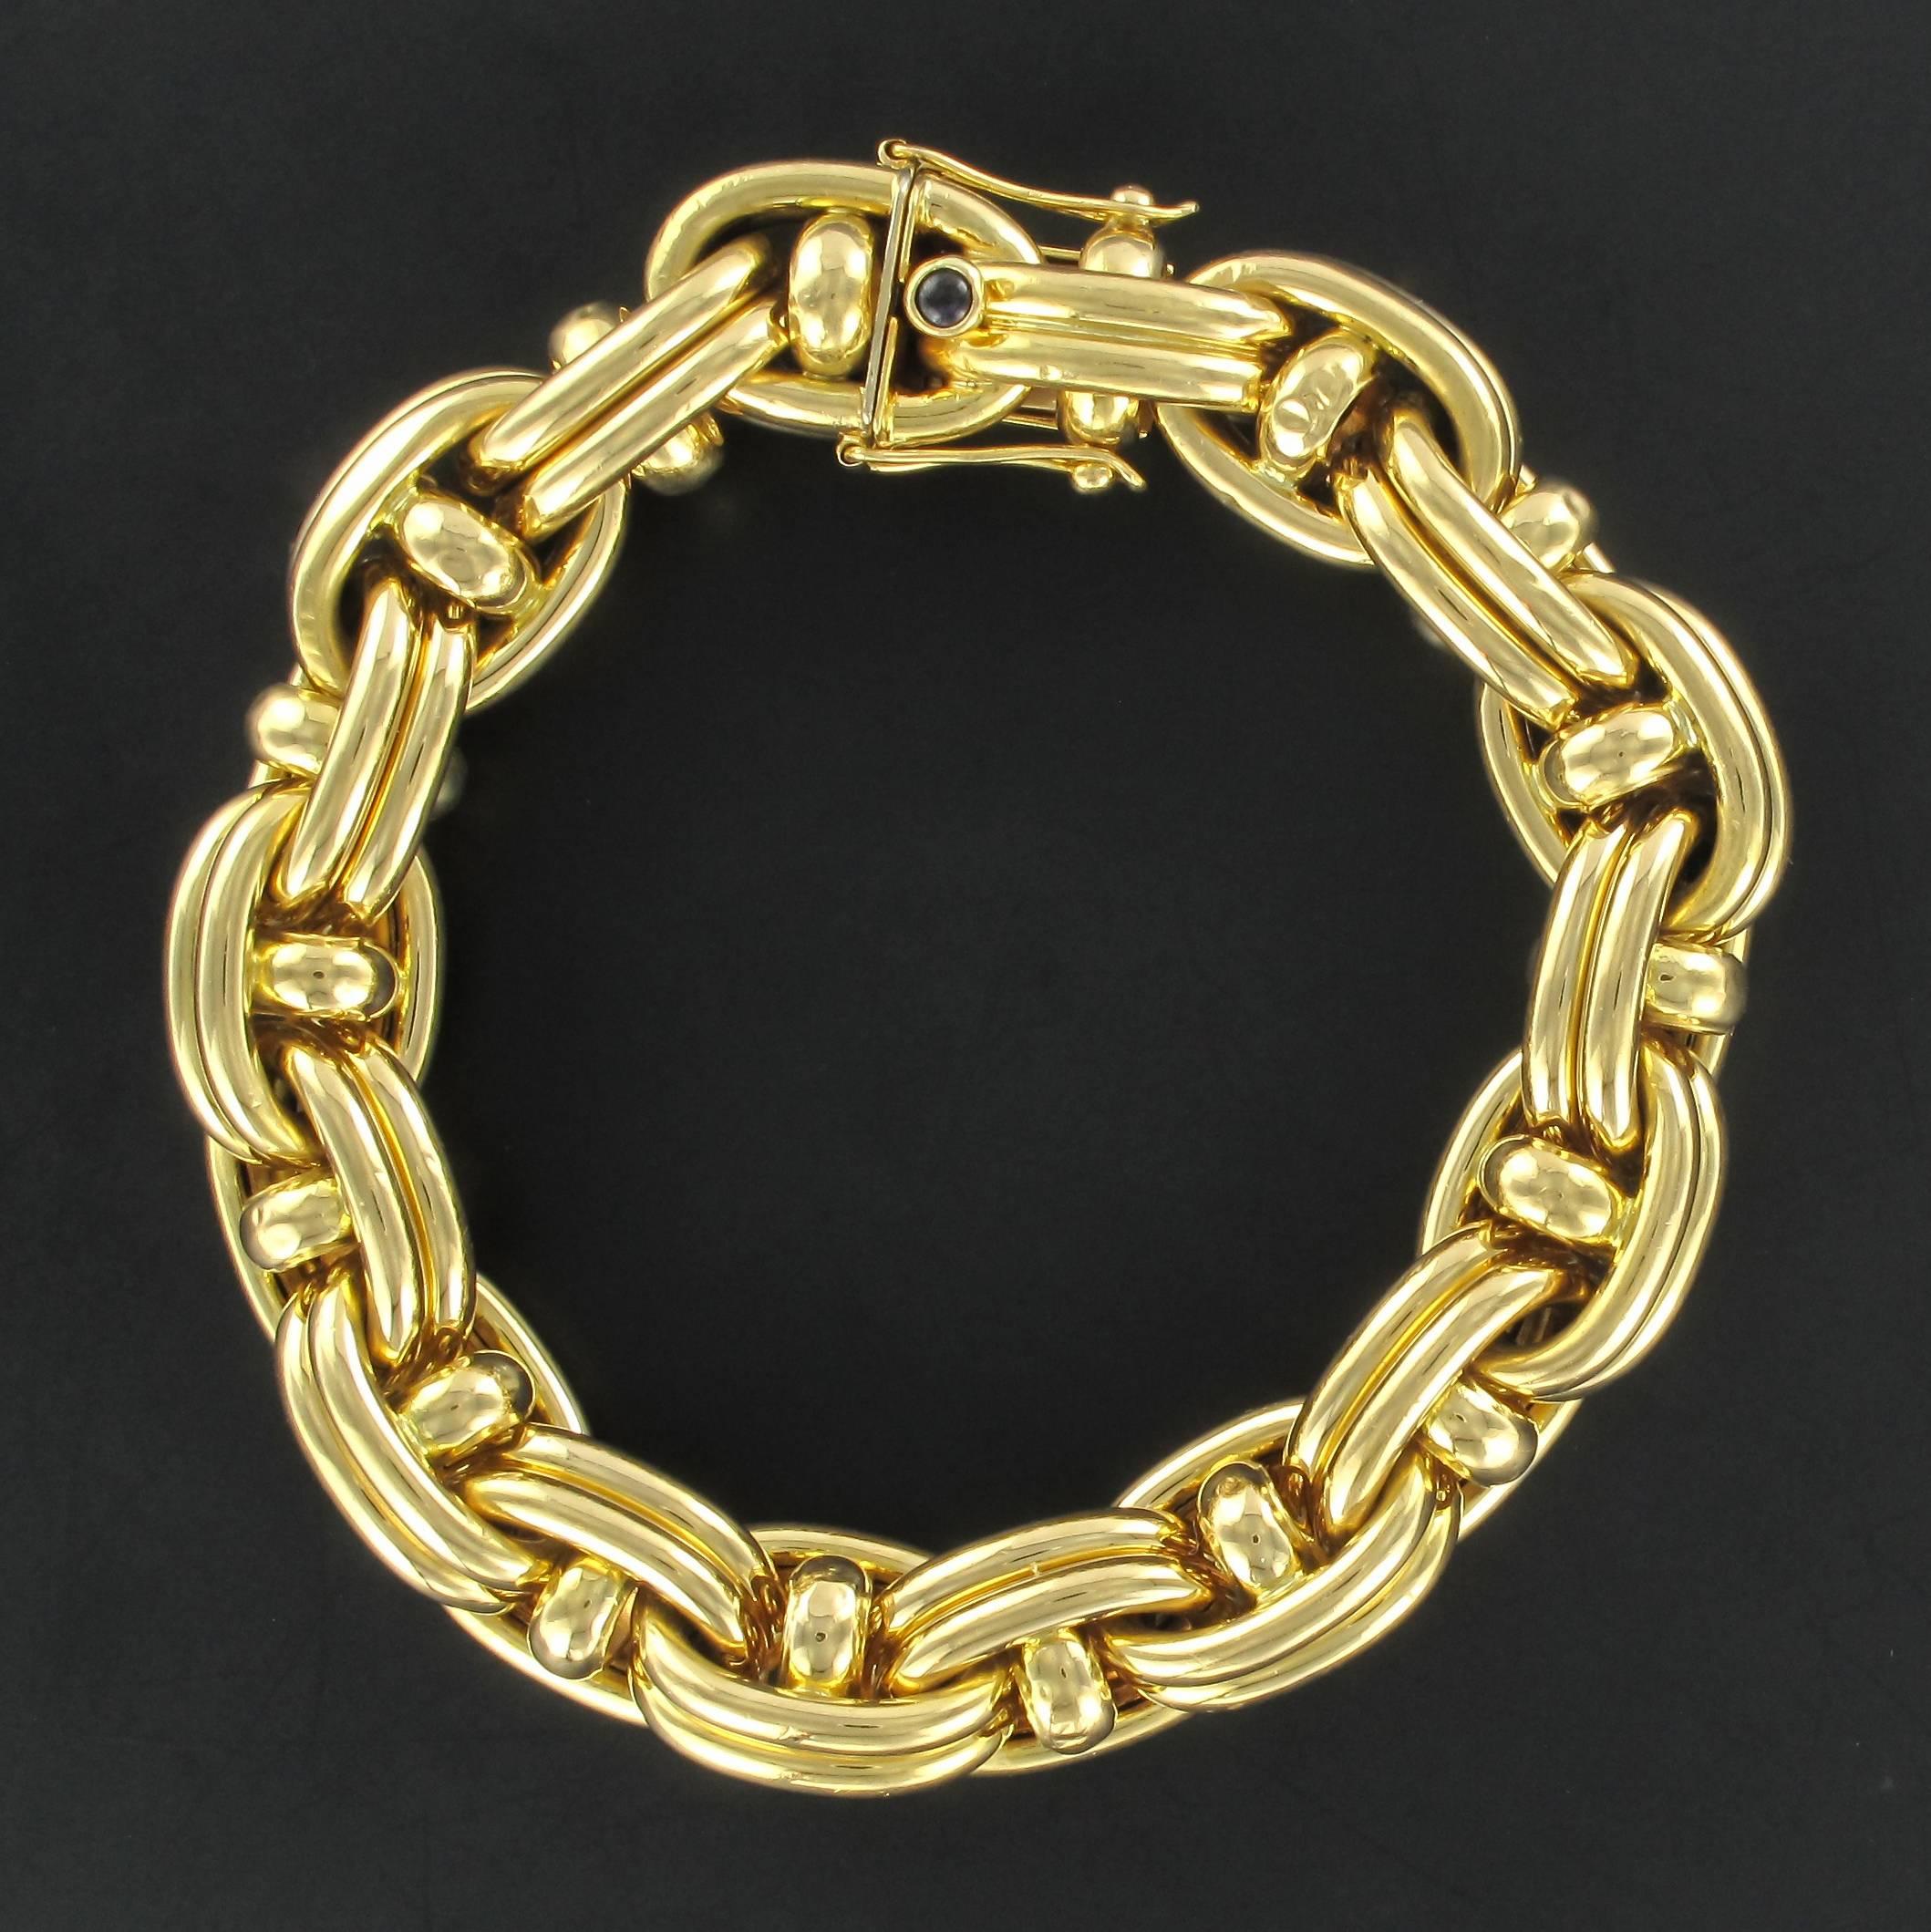 Bracelet in 18 carat yellow gold, eagle head hallmark. 

This bracelet, signed Caplain, is composed of a double anchor link chain. The clip clasp with a safety 8 feature is hidden within the end links. The clasp is bezel set with a small round